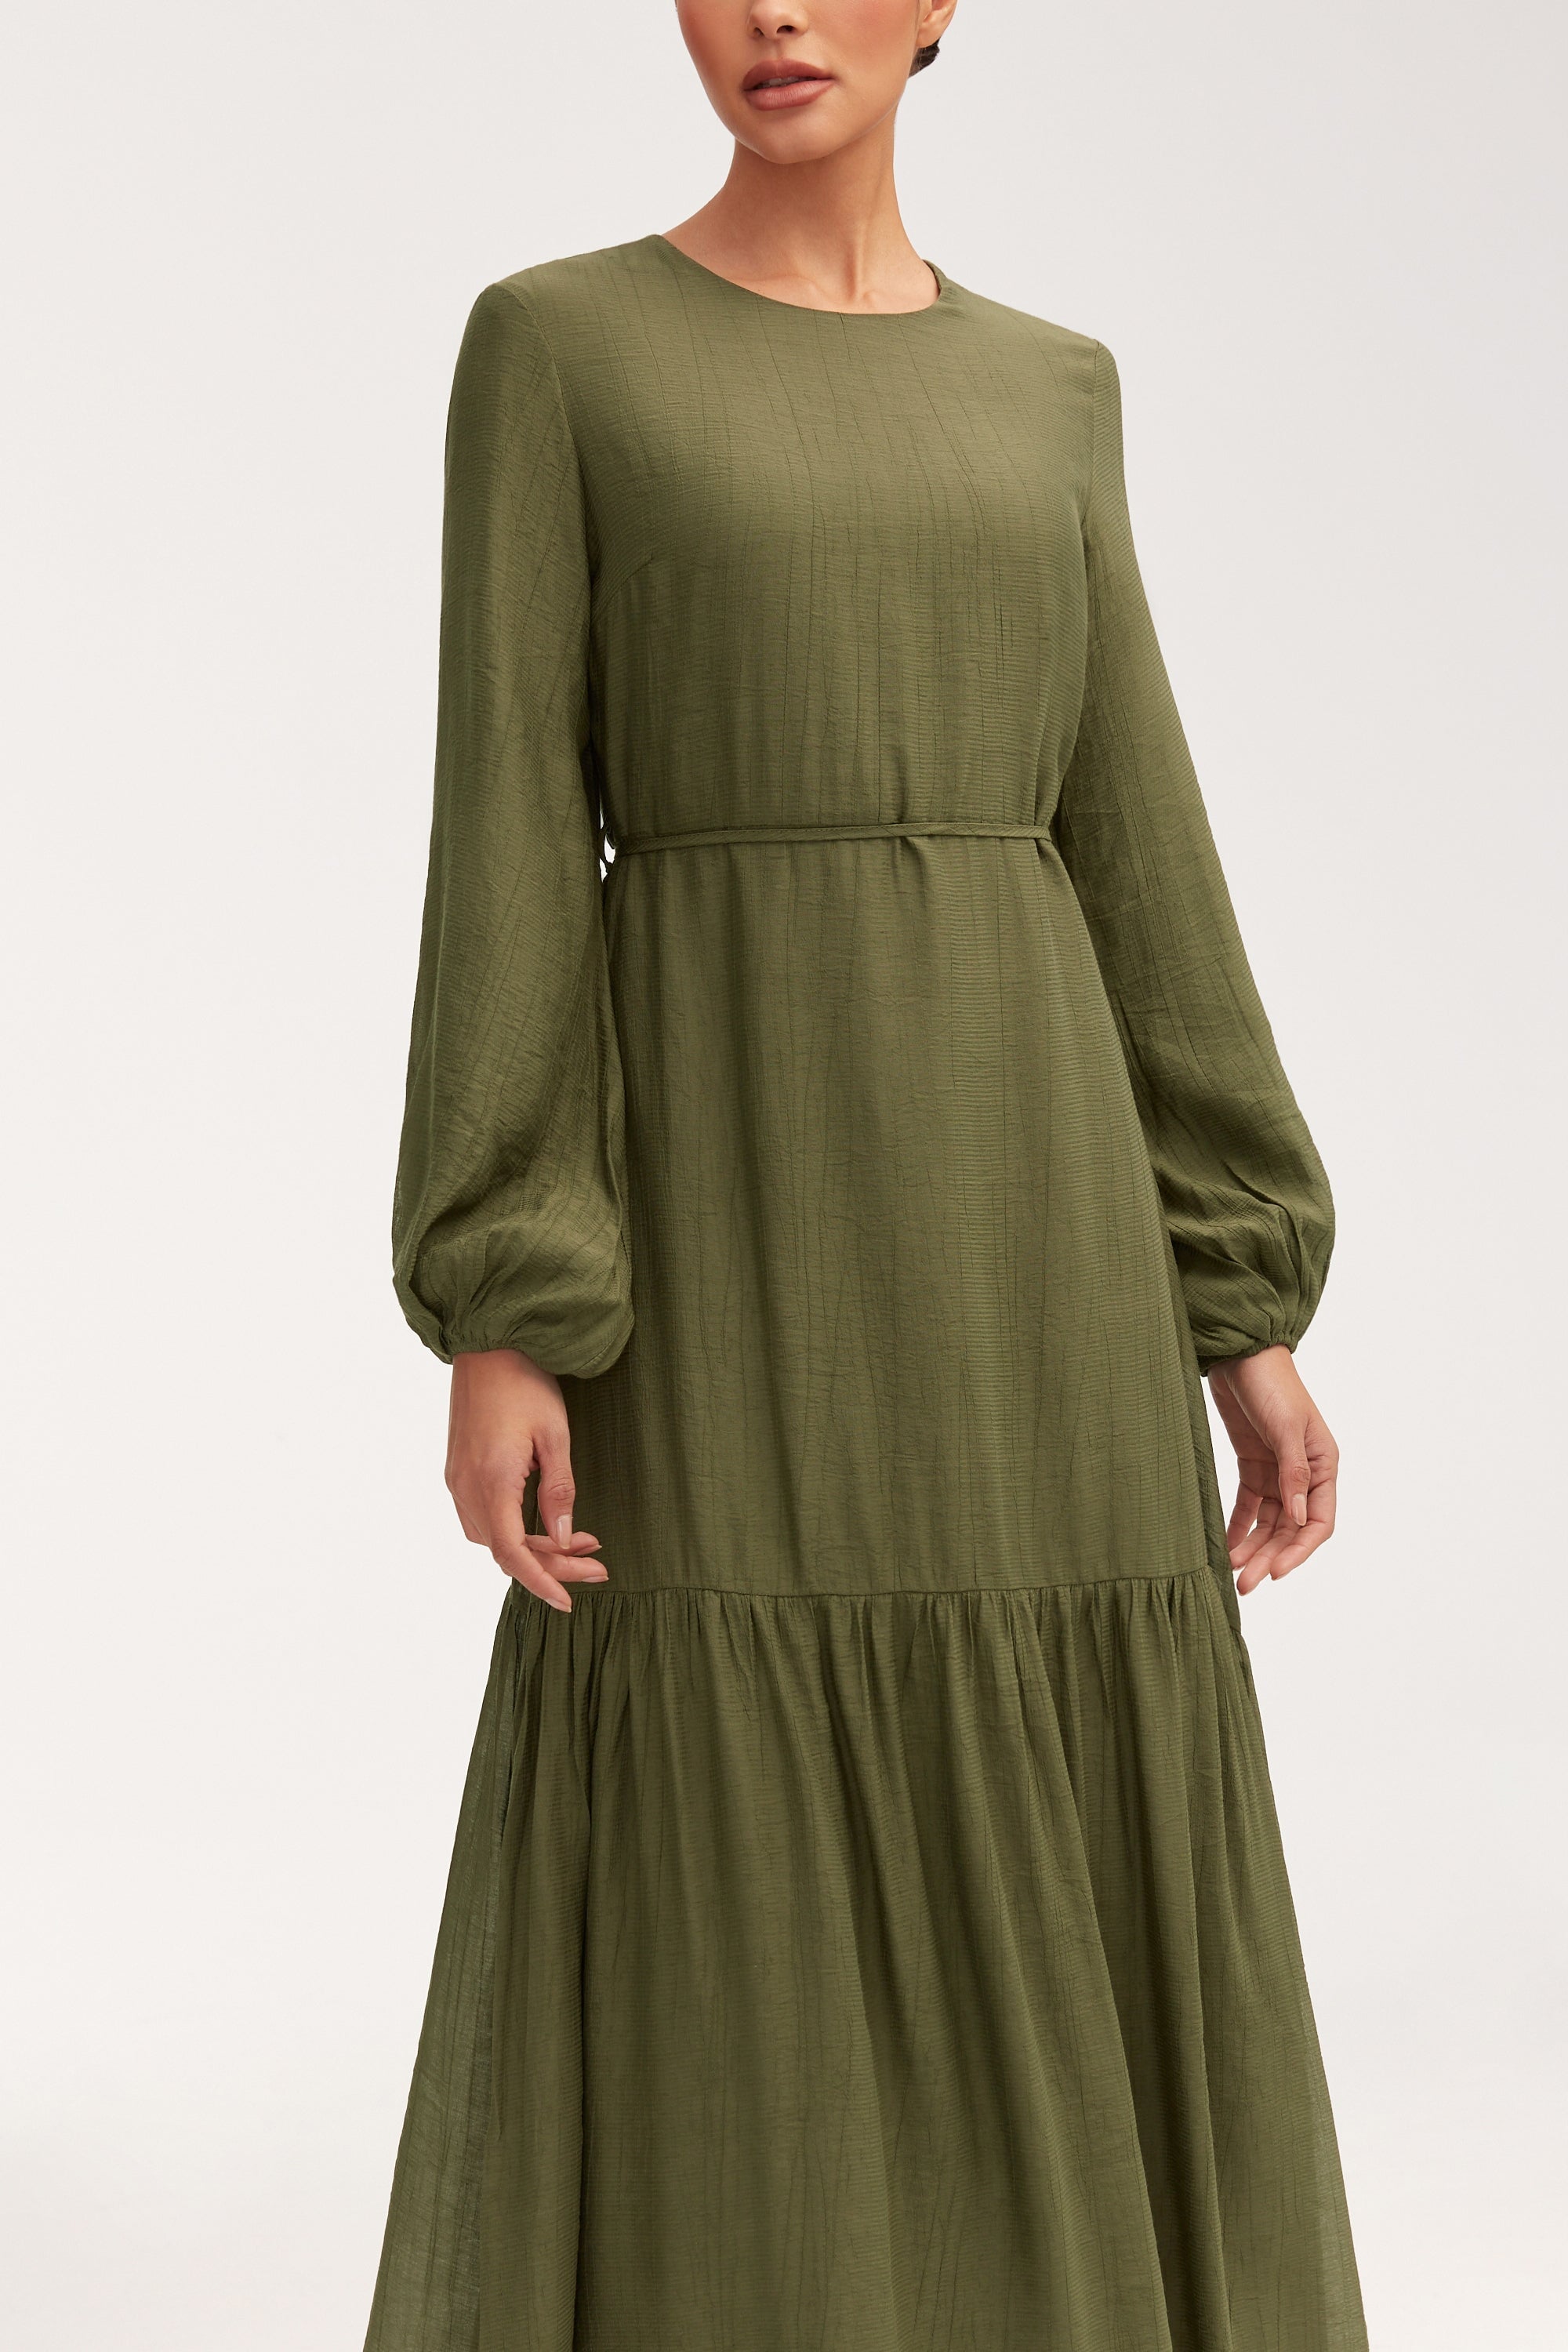 Mila Tiered Maxi Dress - Olive Green Clothing Veiled 